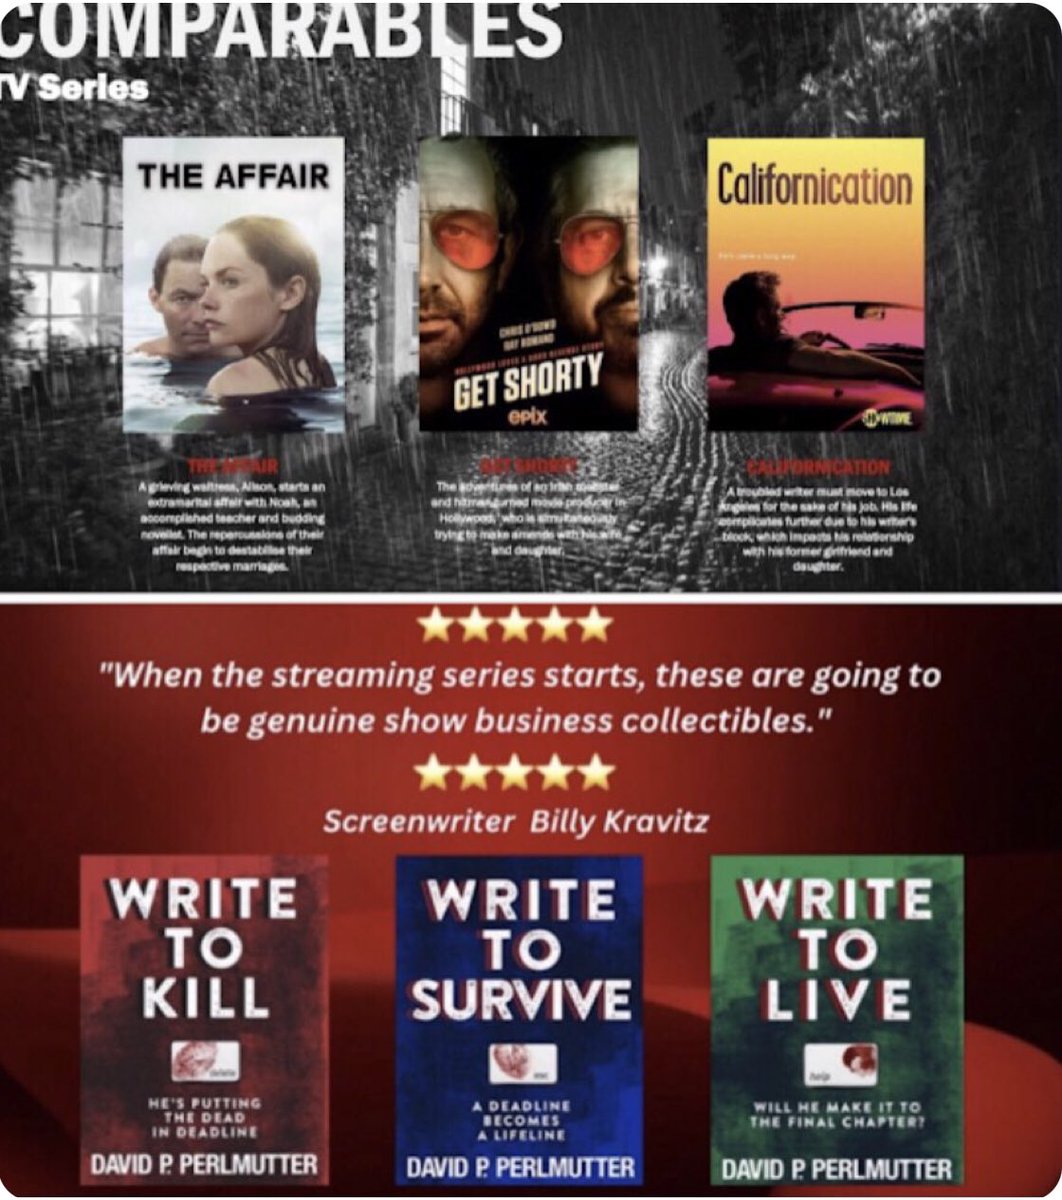 @selcuk_balkar Previously on #WriteToKill….. 🔪🩸 Can you imagine @kat_films seeing that on @netflix @ParamountUK @peacock @HBO @Showtime @AppleTV @ABC @nbc @ITV @alibi_channel @STARZ @StreamOnMax @channel5_tv @BBCOne @Channel4 ✍🏼🎬 TV Comparable: @SHO_TheAffair @getshorty @SHO_Cali 📺 OVER…